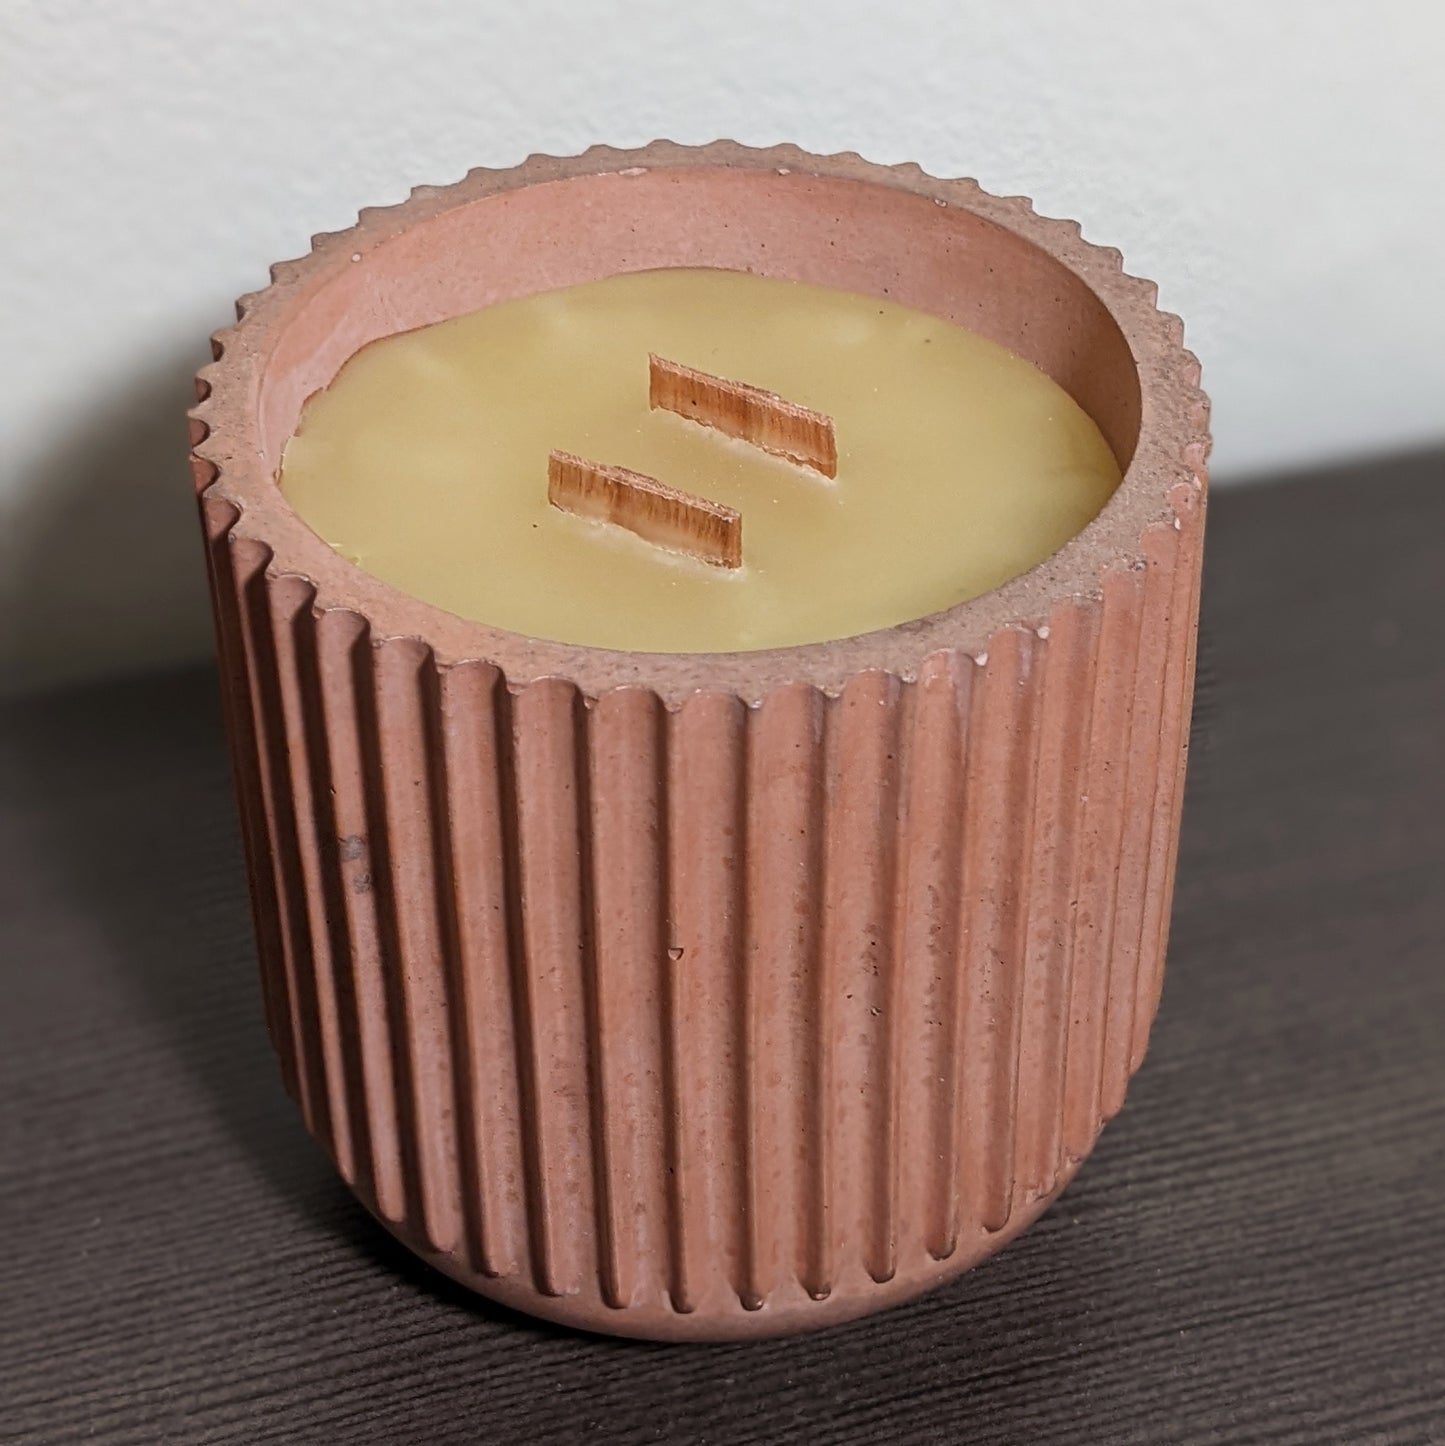 100% Pure USA Beeswax candle in ridge concrete vessel